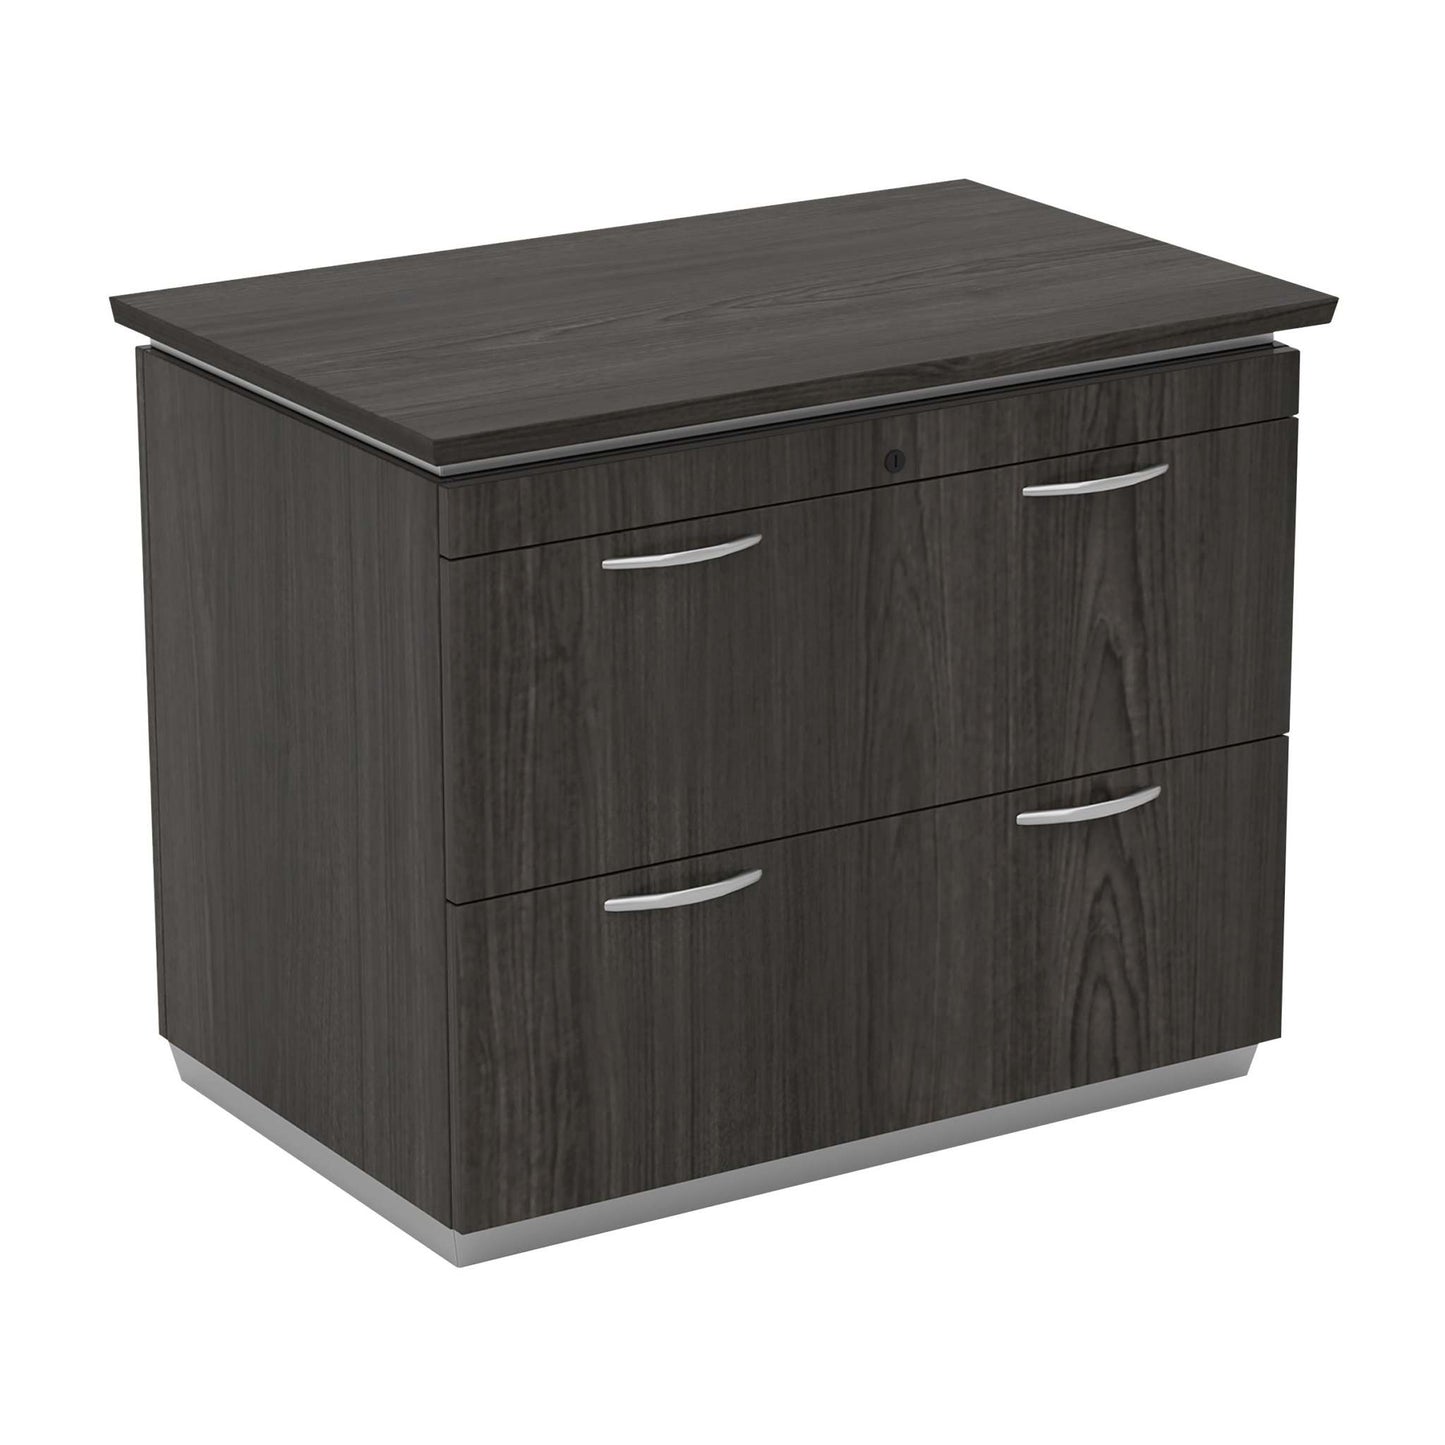 New Tuxedo Series 2 Drawer Lateral File Cabinet by Office Star